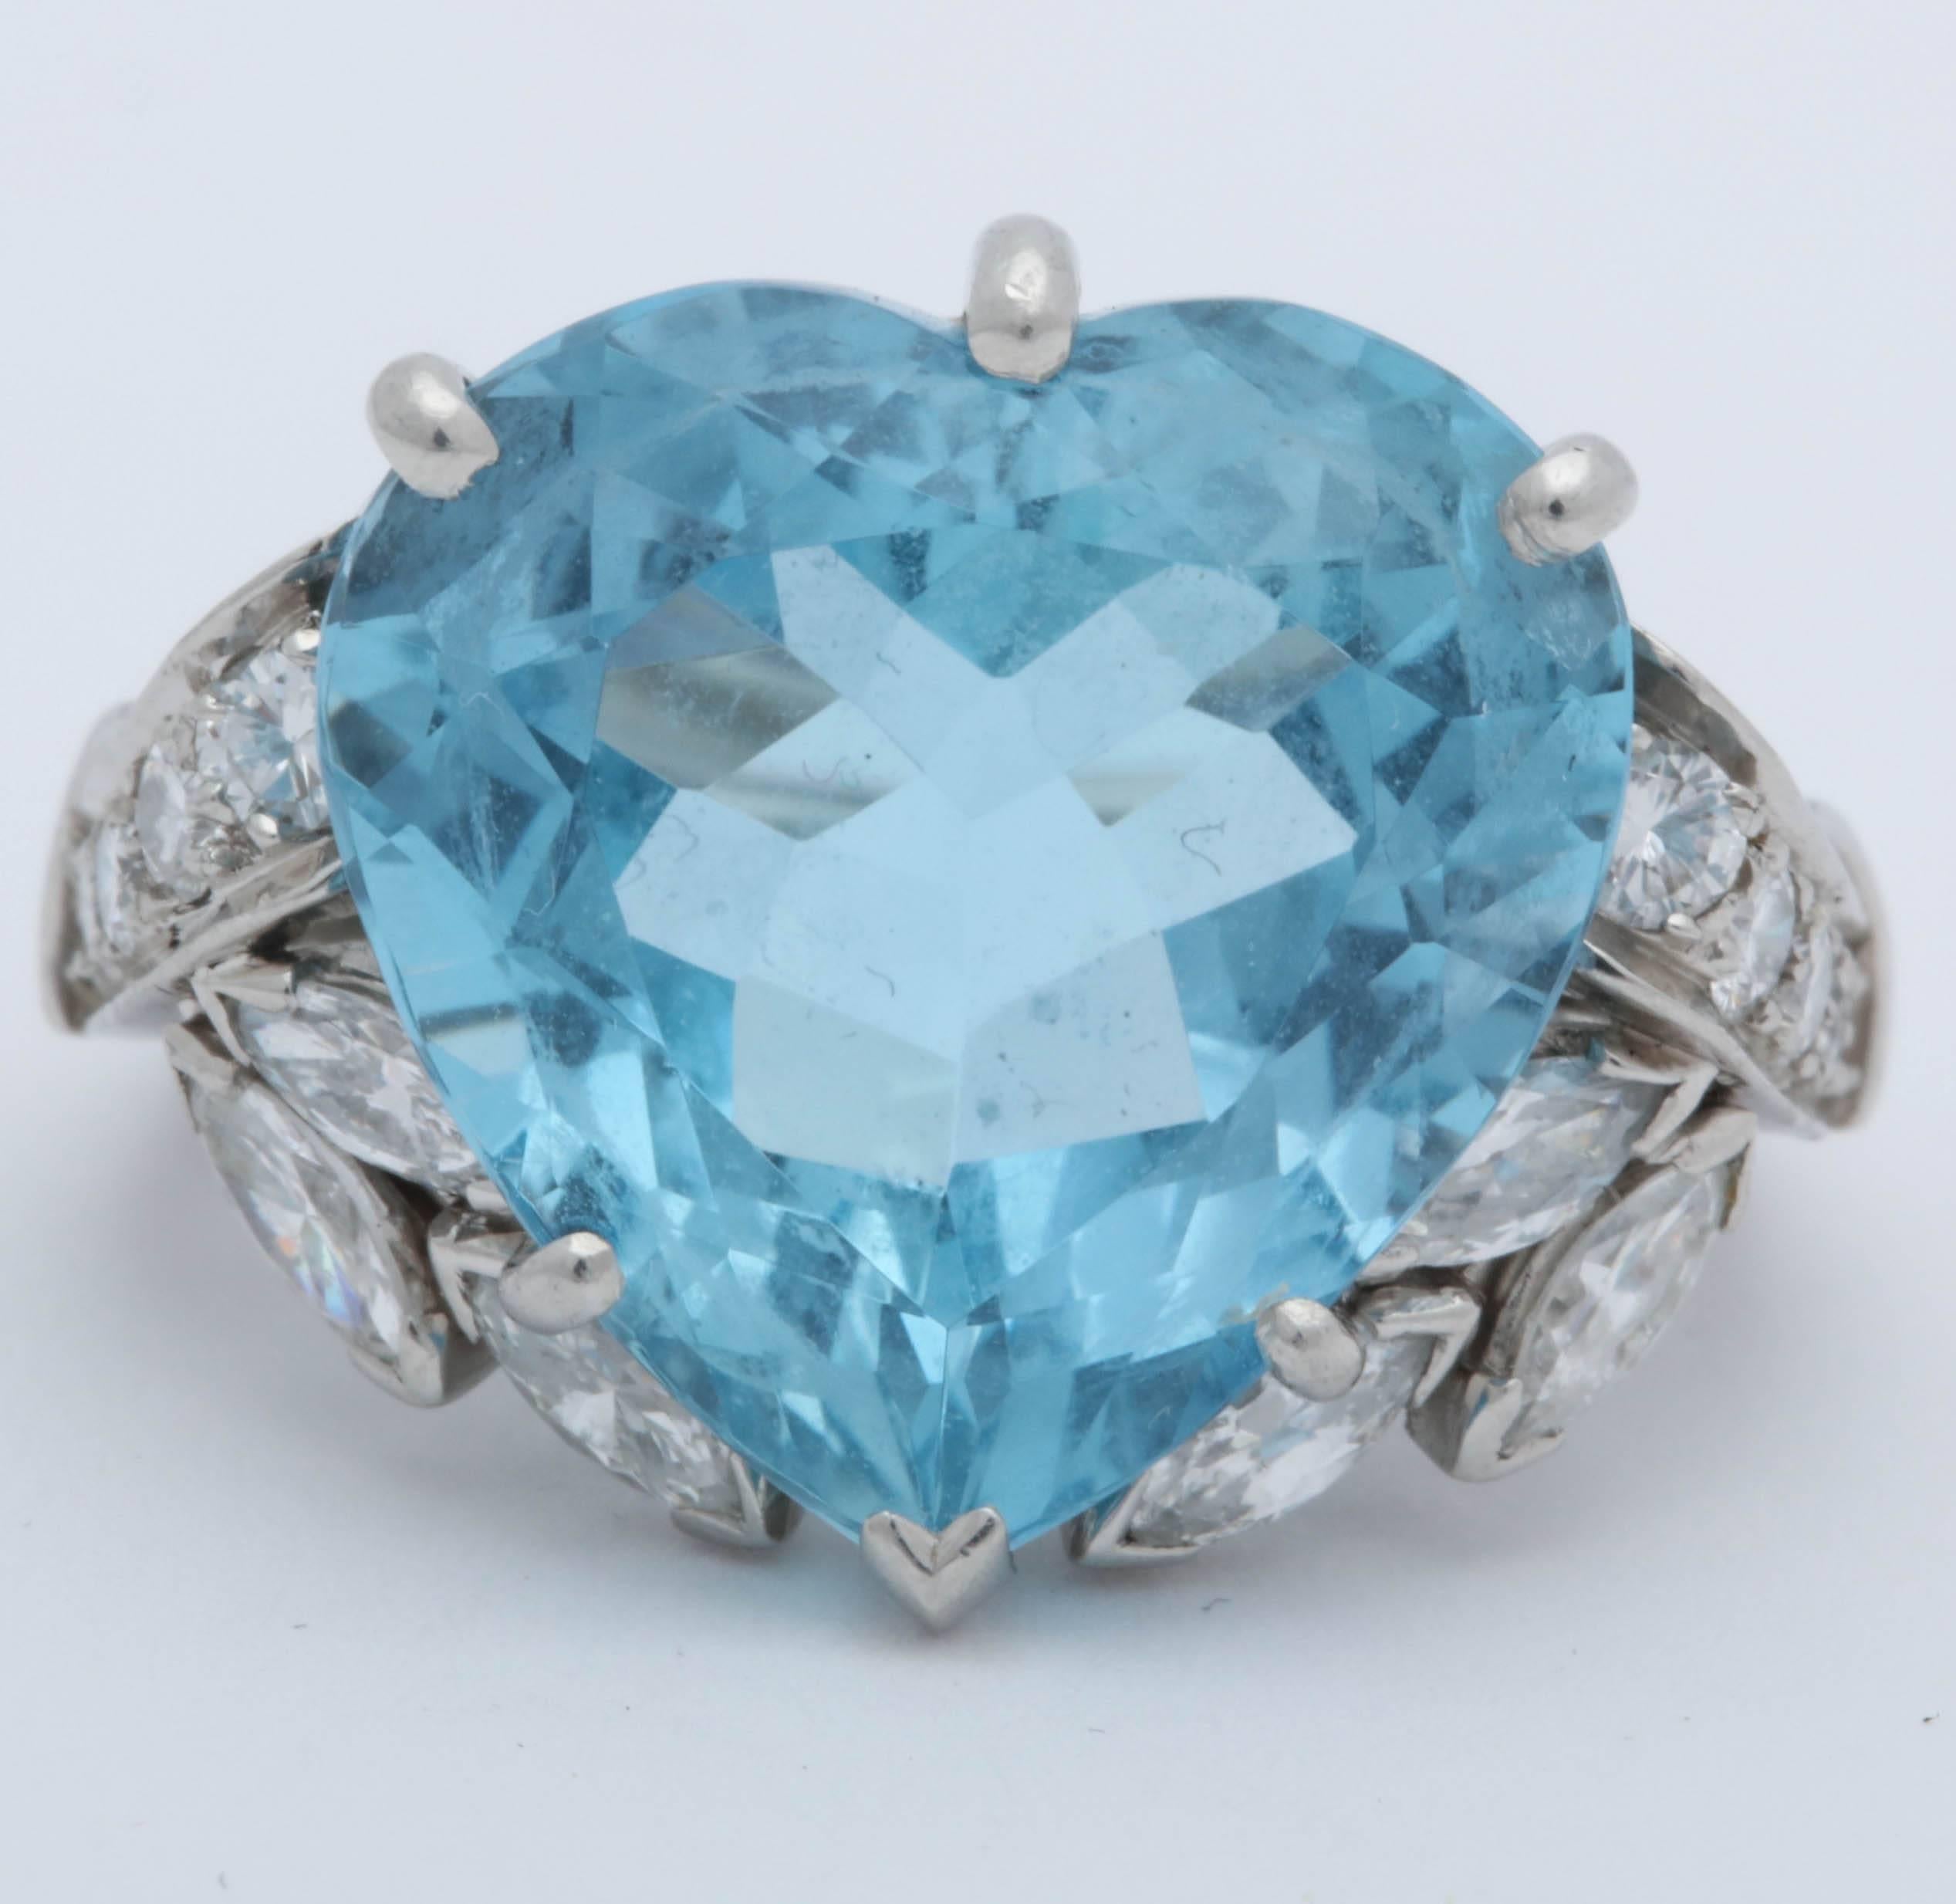 One Ladies Platinum Mounting Ring Designed With One Large Heart Shaped Cut Prong Set Aquamarine Stone Weighing Approximately 20 Carats. Ring Is Flanked by Numerous Round Cut And Marquis Shaped High Quality Diamonds Weighing Approximately 1.50 Cts